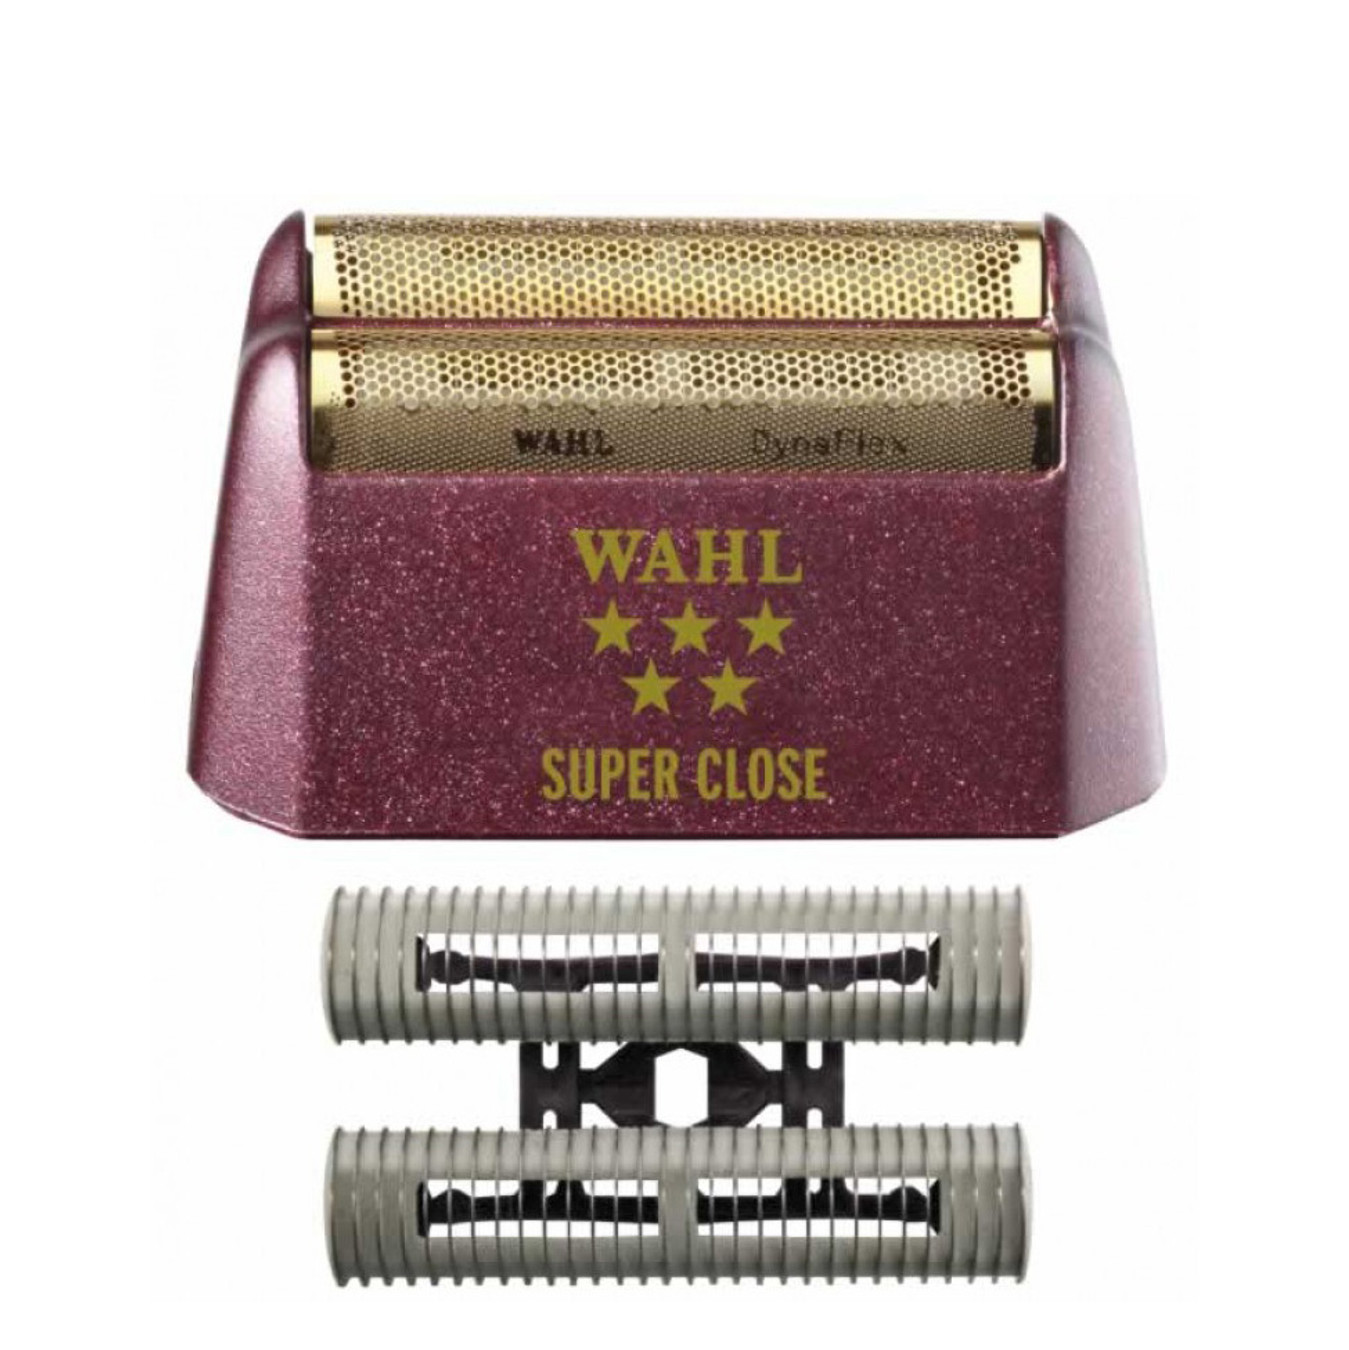 WAHL 5 Star Replacement Foil & Cutter Bar Assembly Shaver Shaper